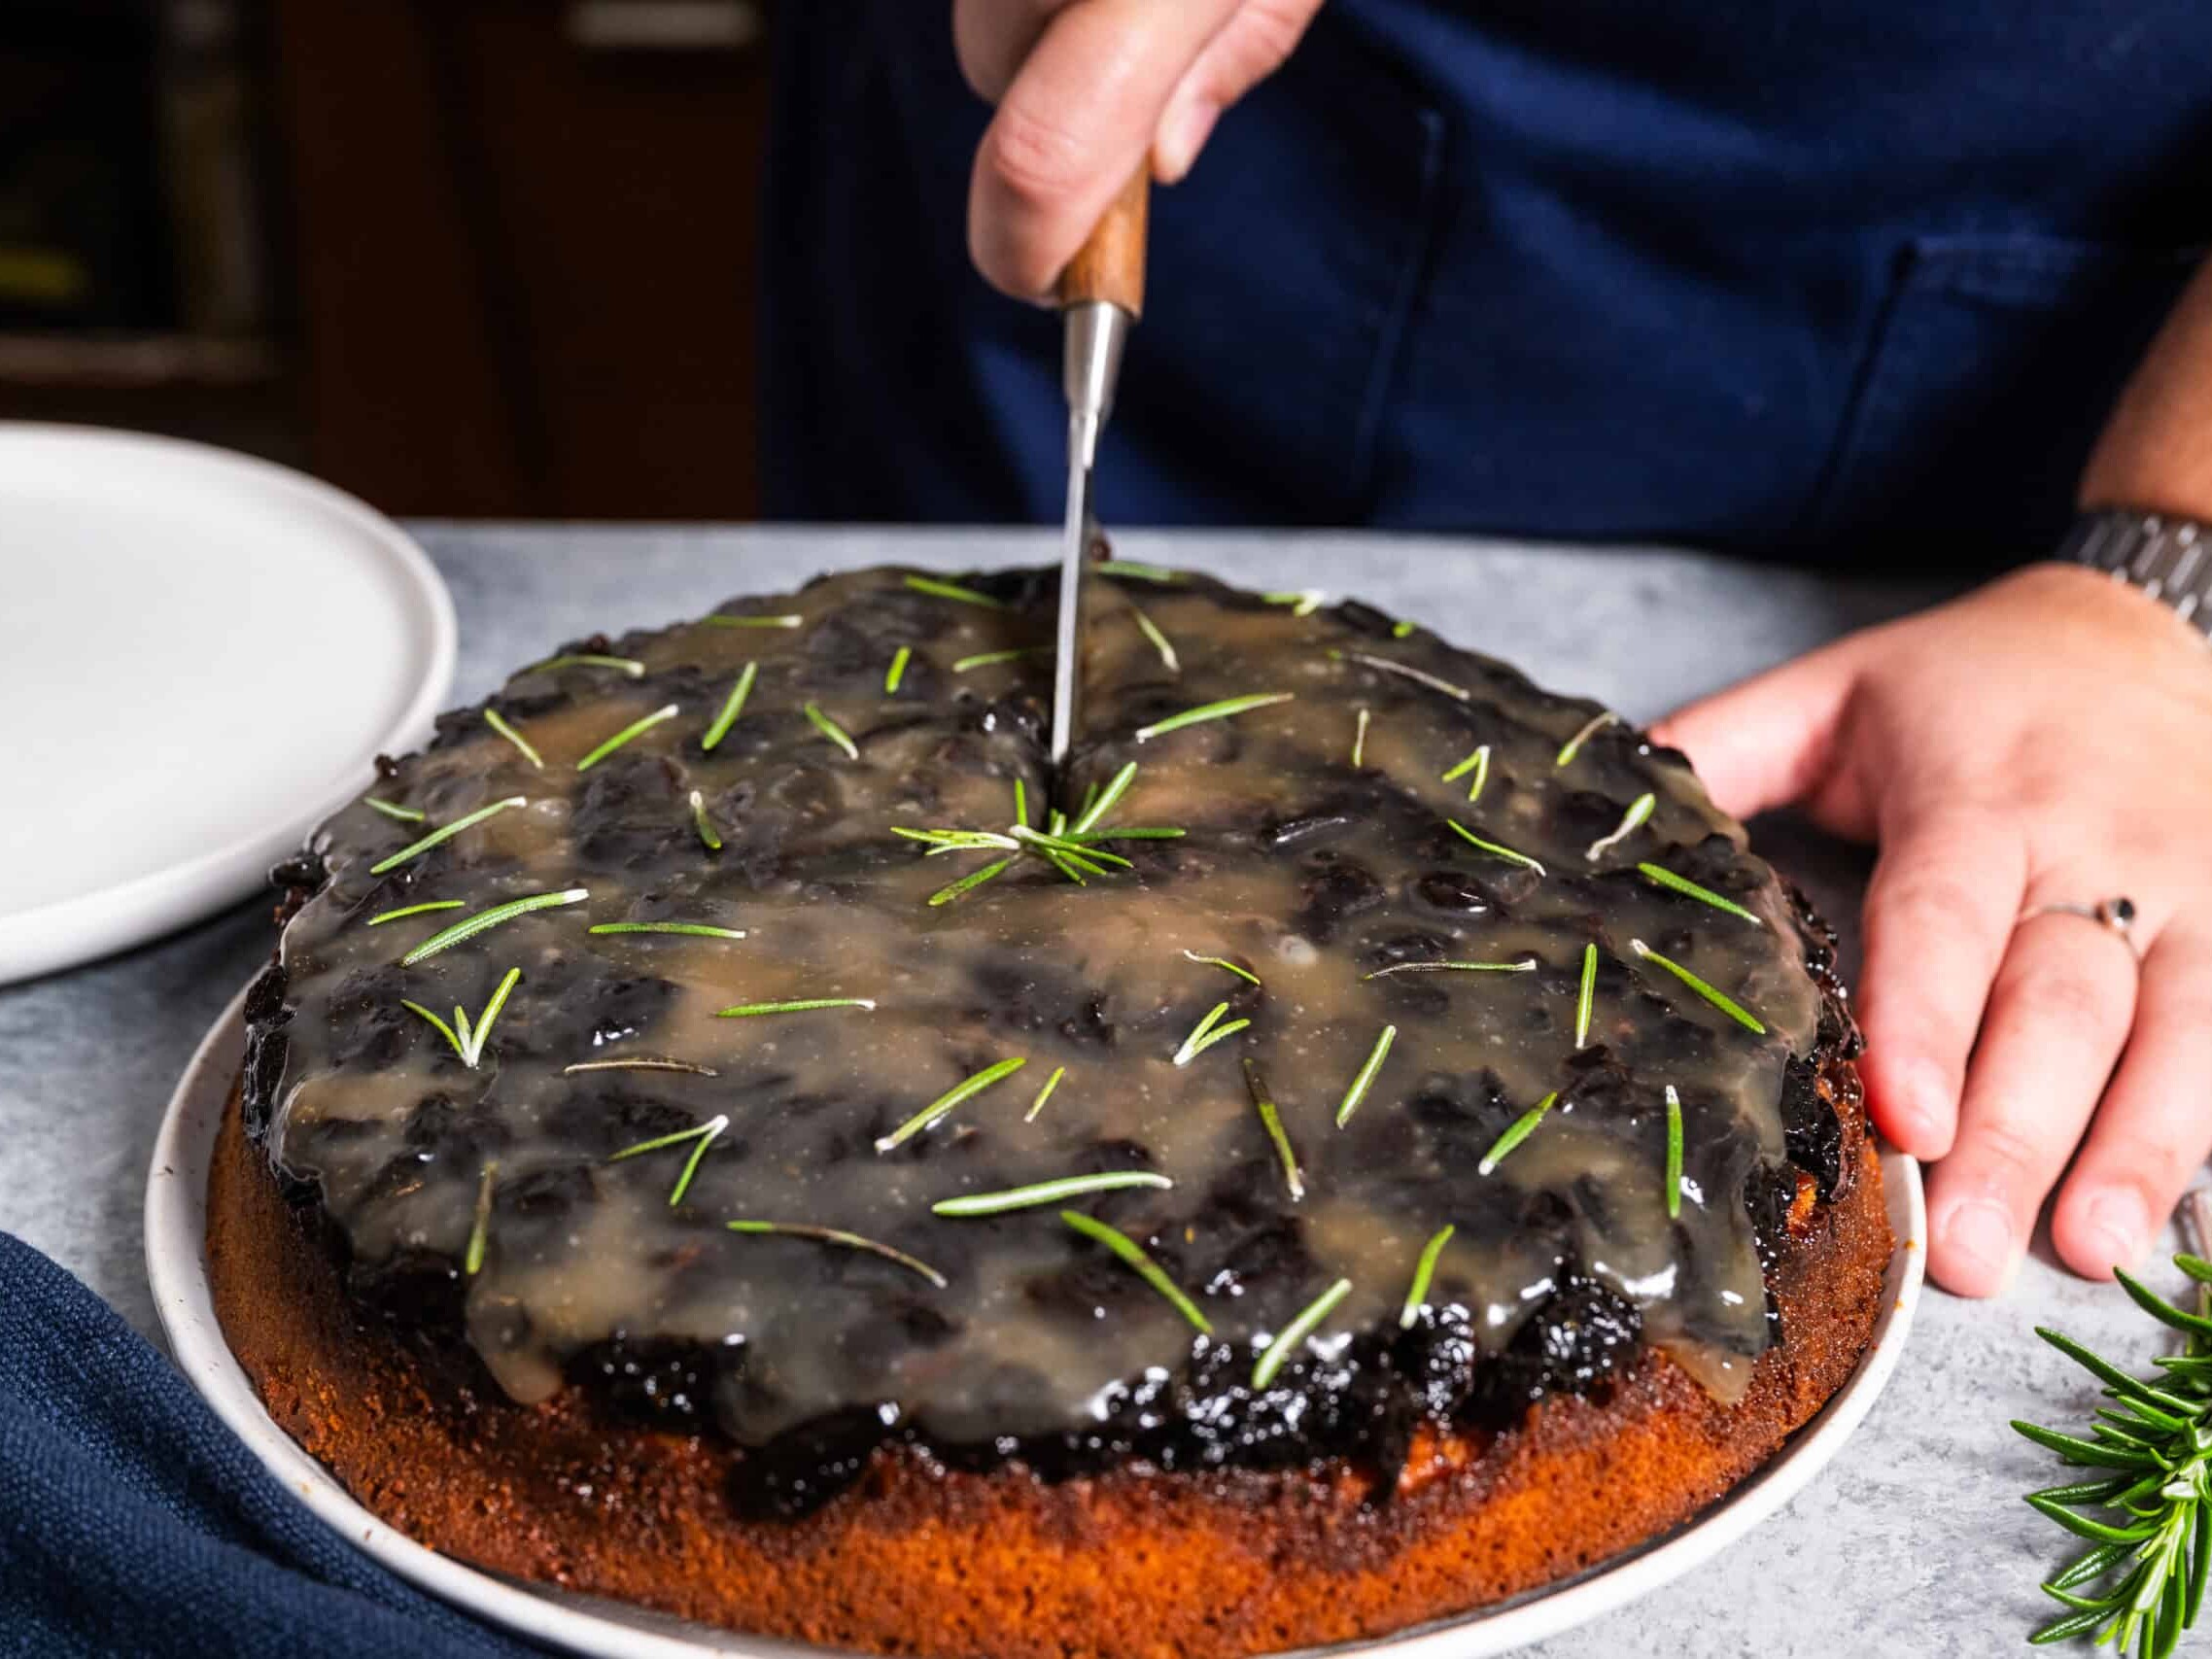 slicing gregory gourdet's ginger cake with prune and maple glaze